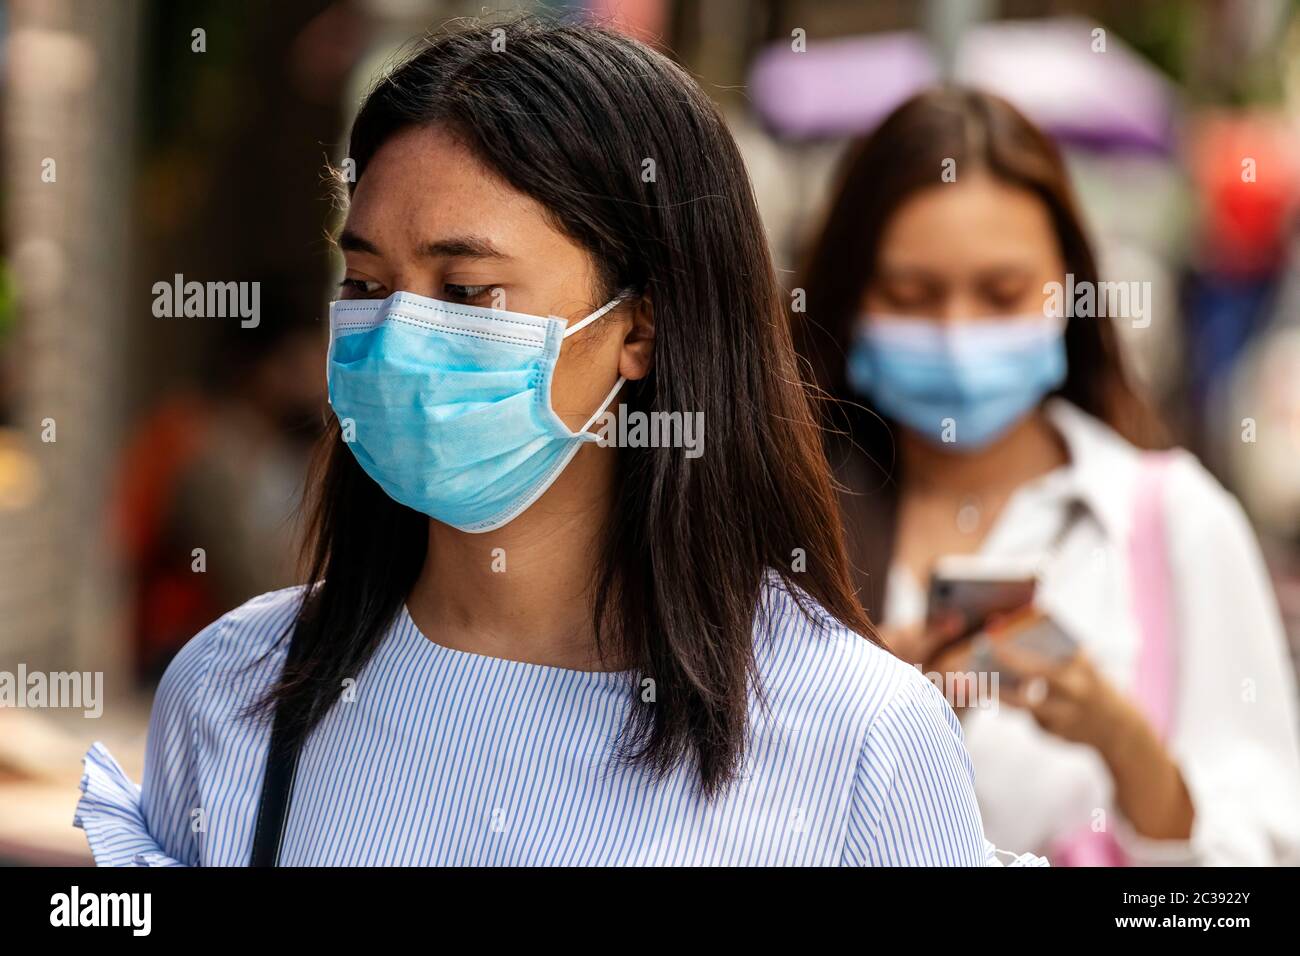 Office worker wearing face mask during Covid 19 pandemic, Bangkok, Thailand Stock Photo